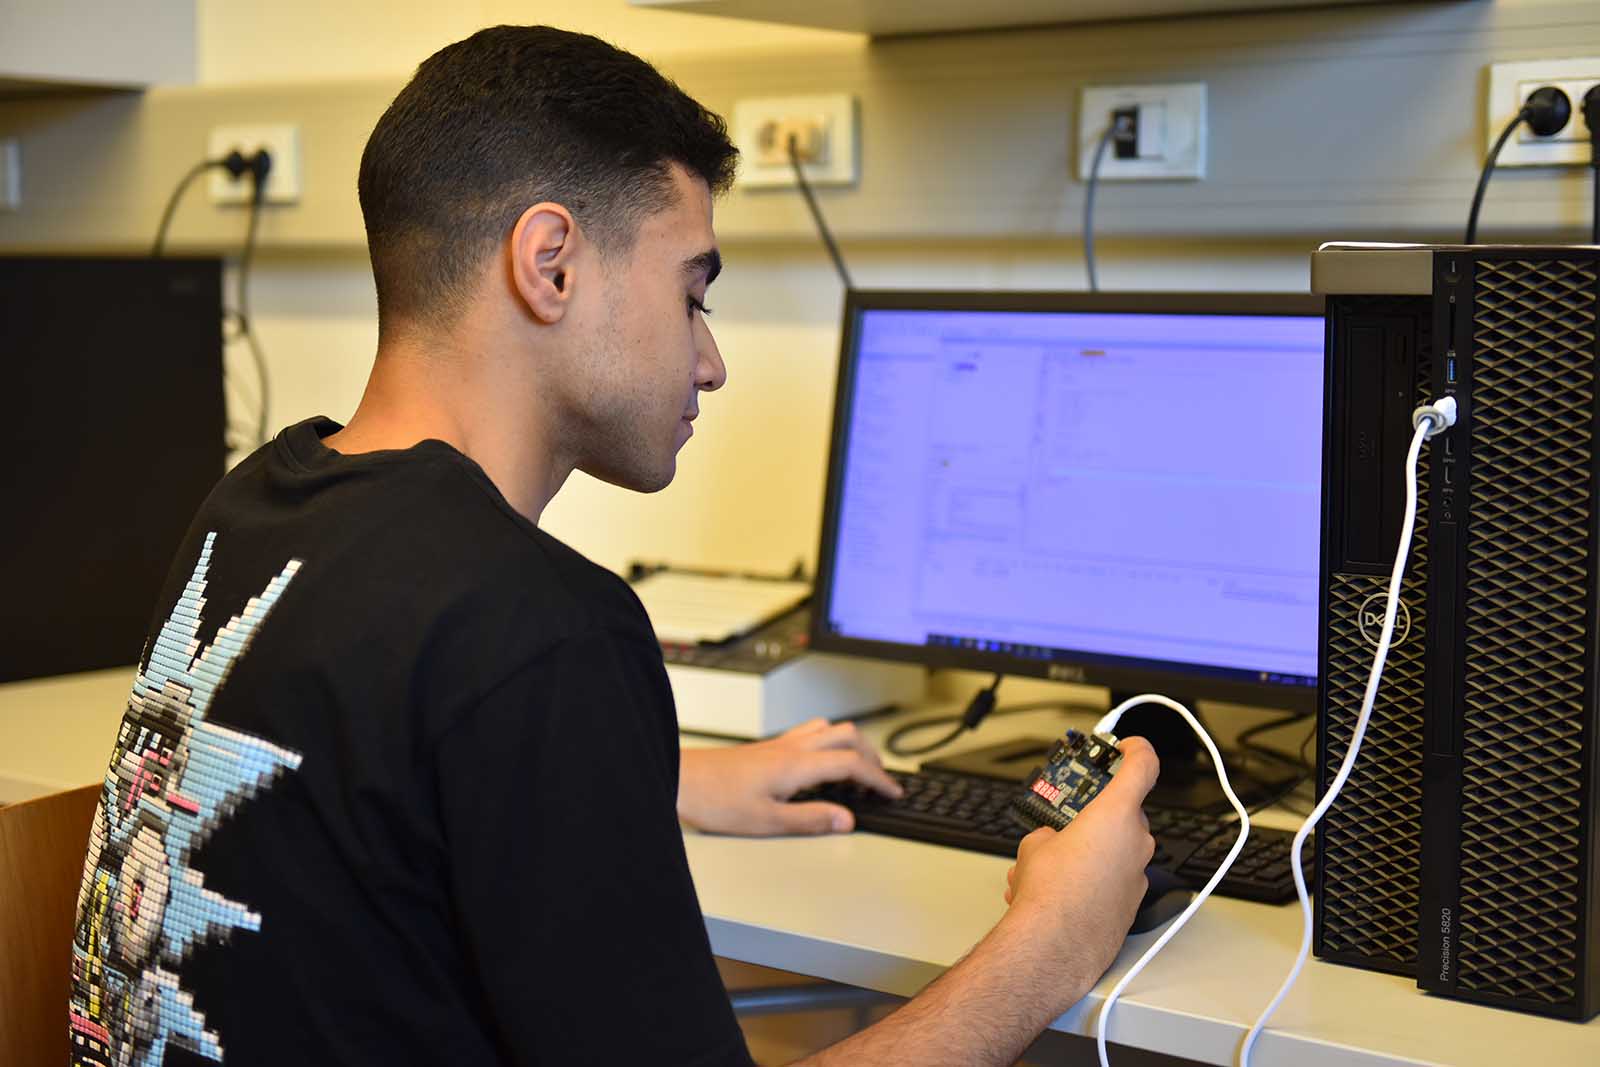 Student working with electronic equipment in lab